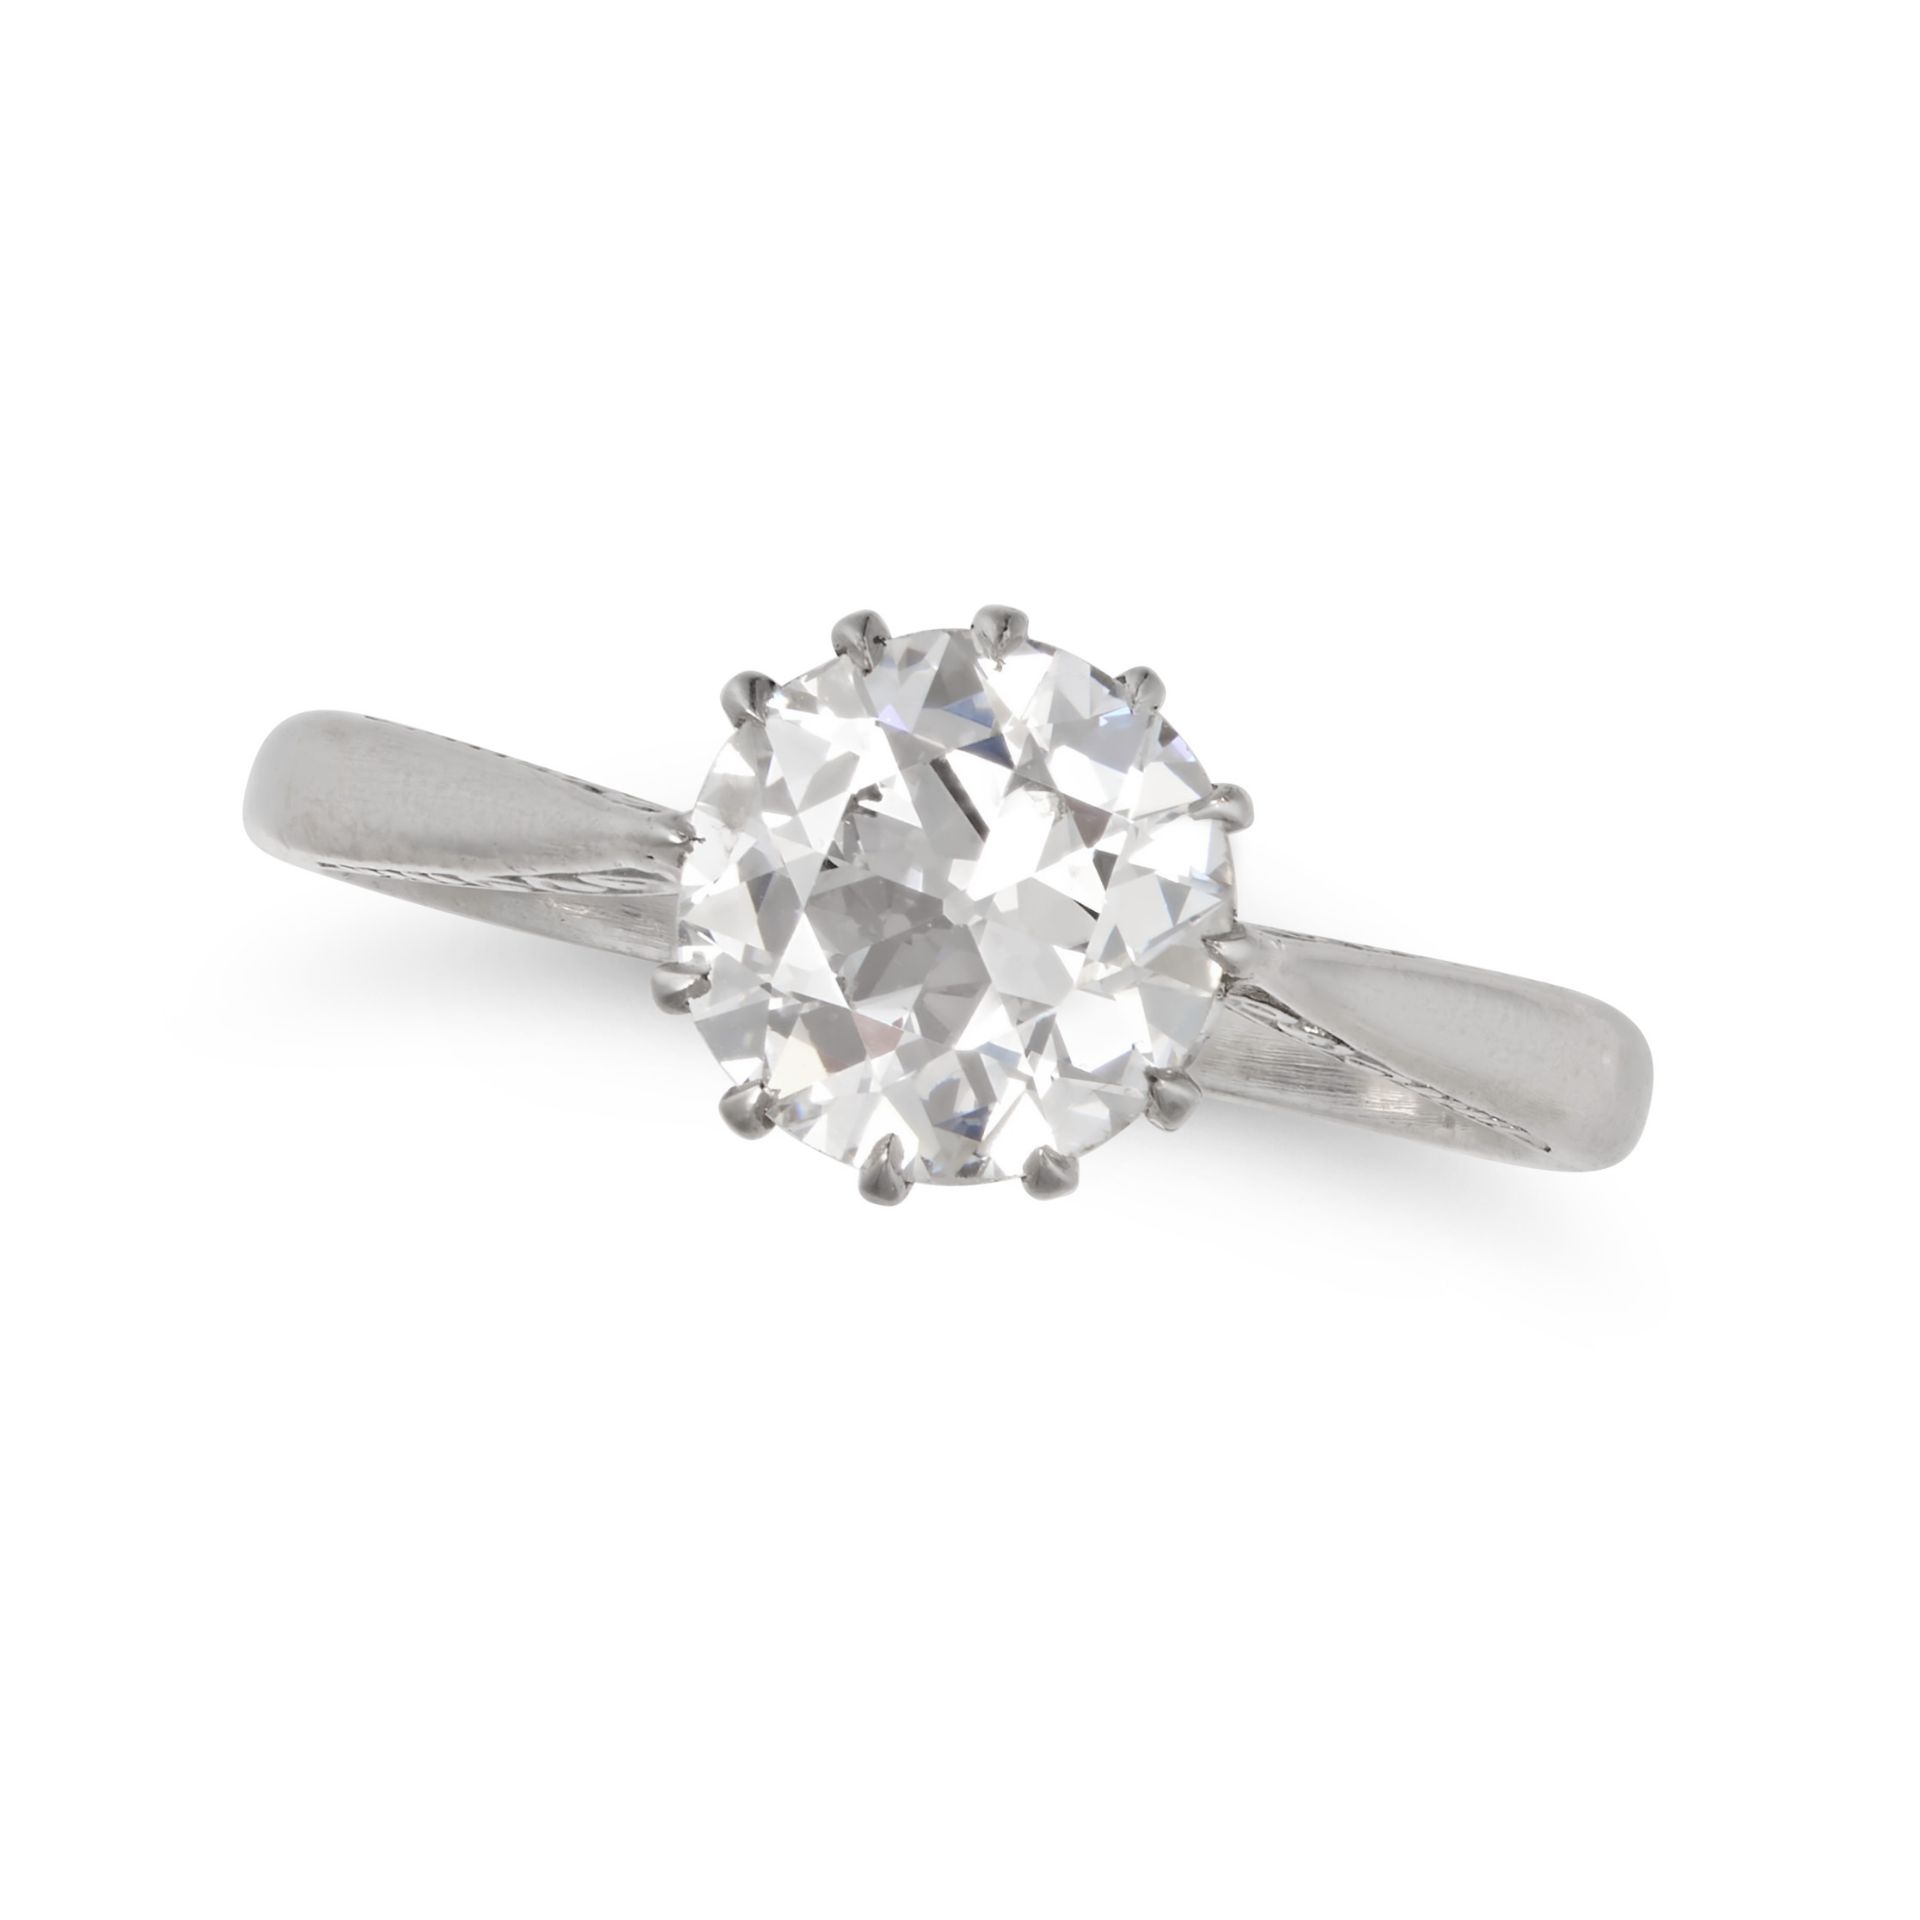 A SOLITAIRE DIAMOND RING in platinum, set with an old European cut diamond of 1.26 carats, inscri...